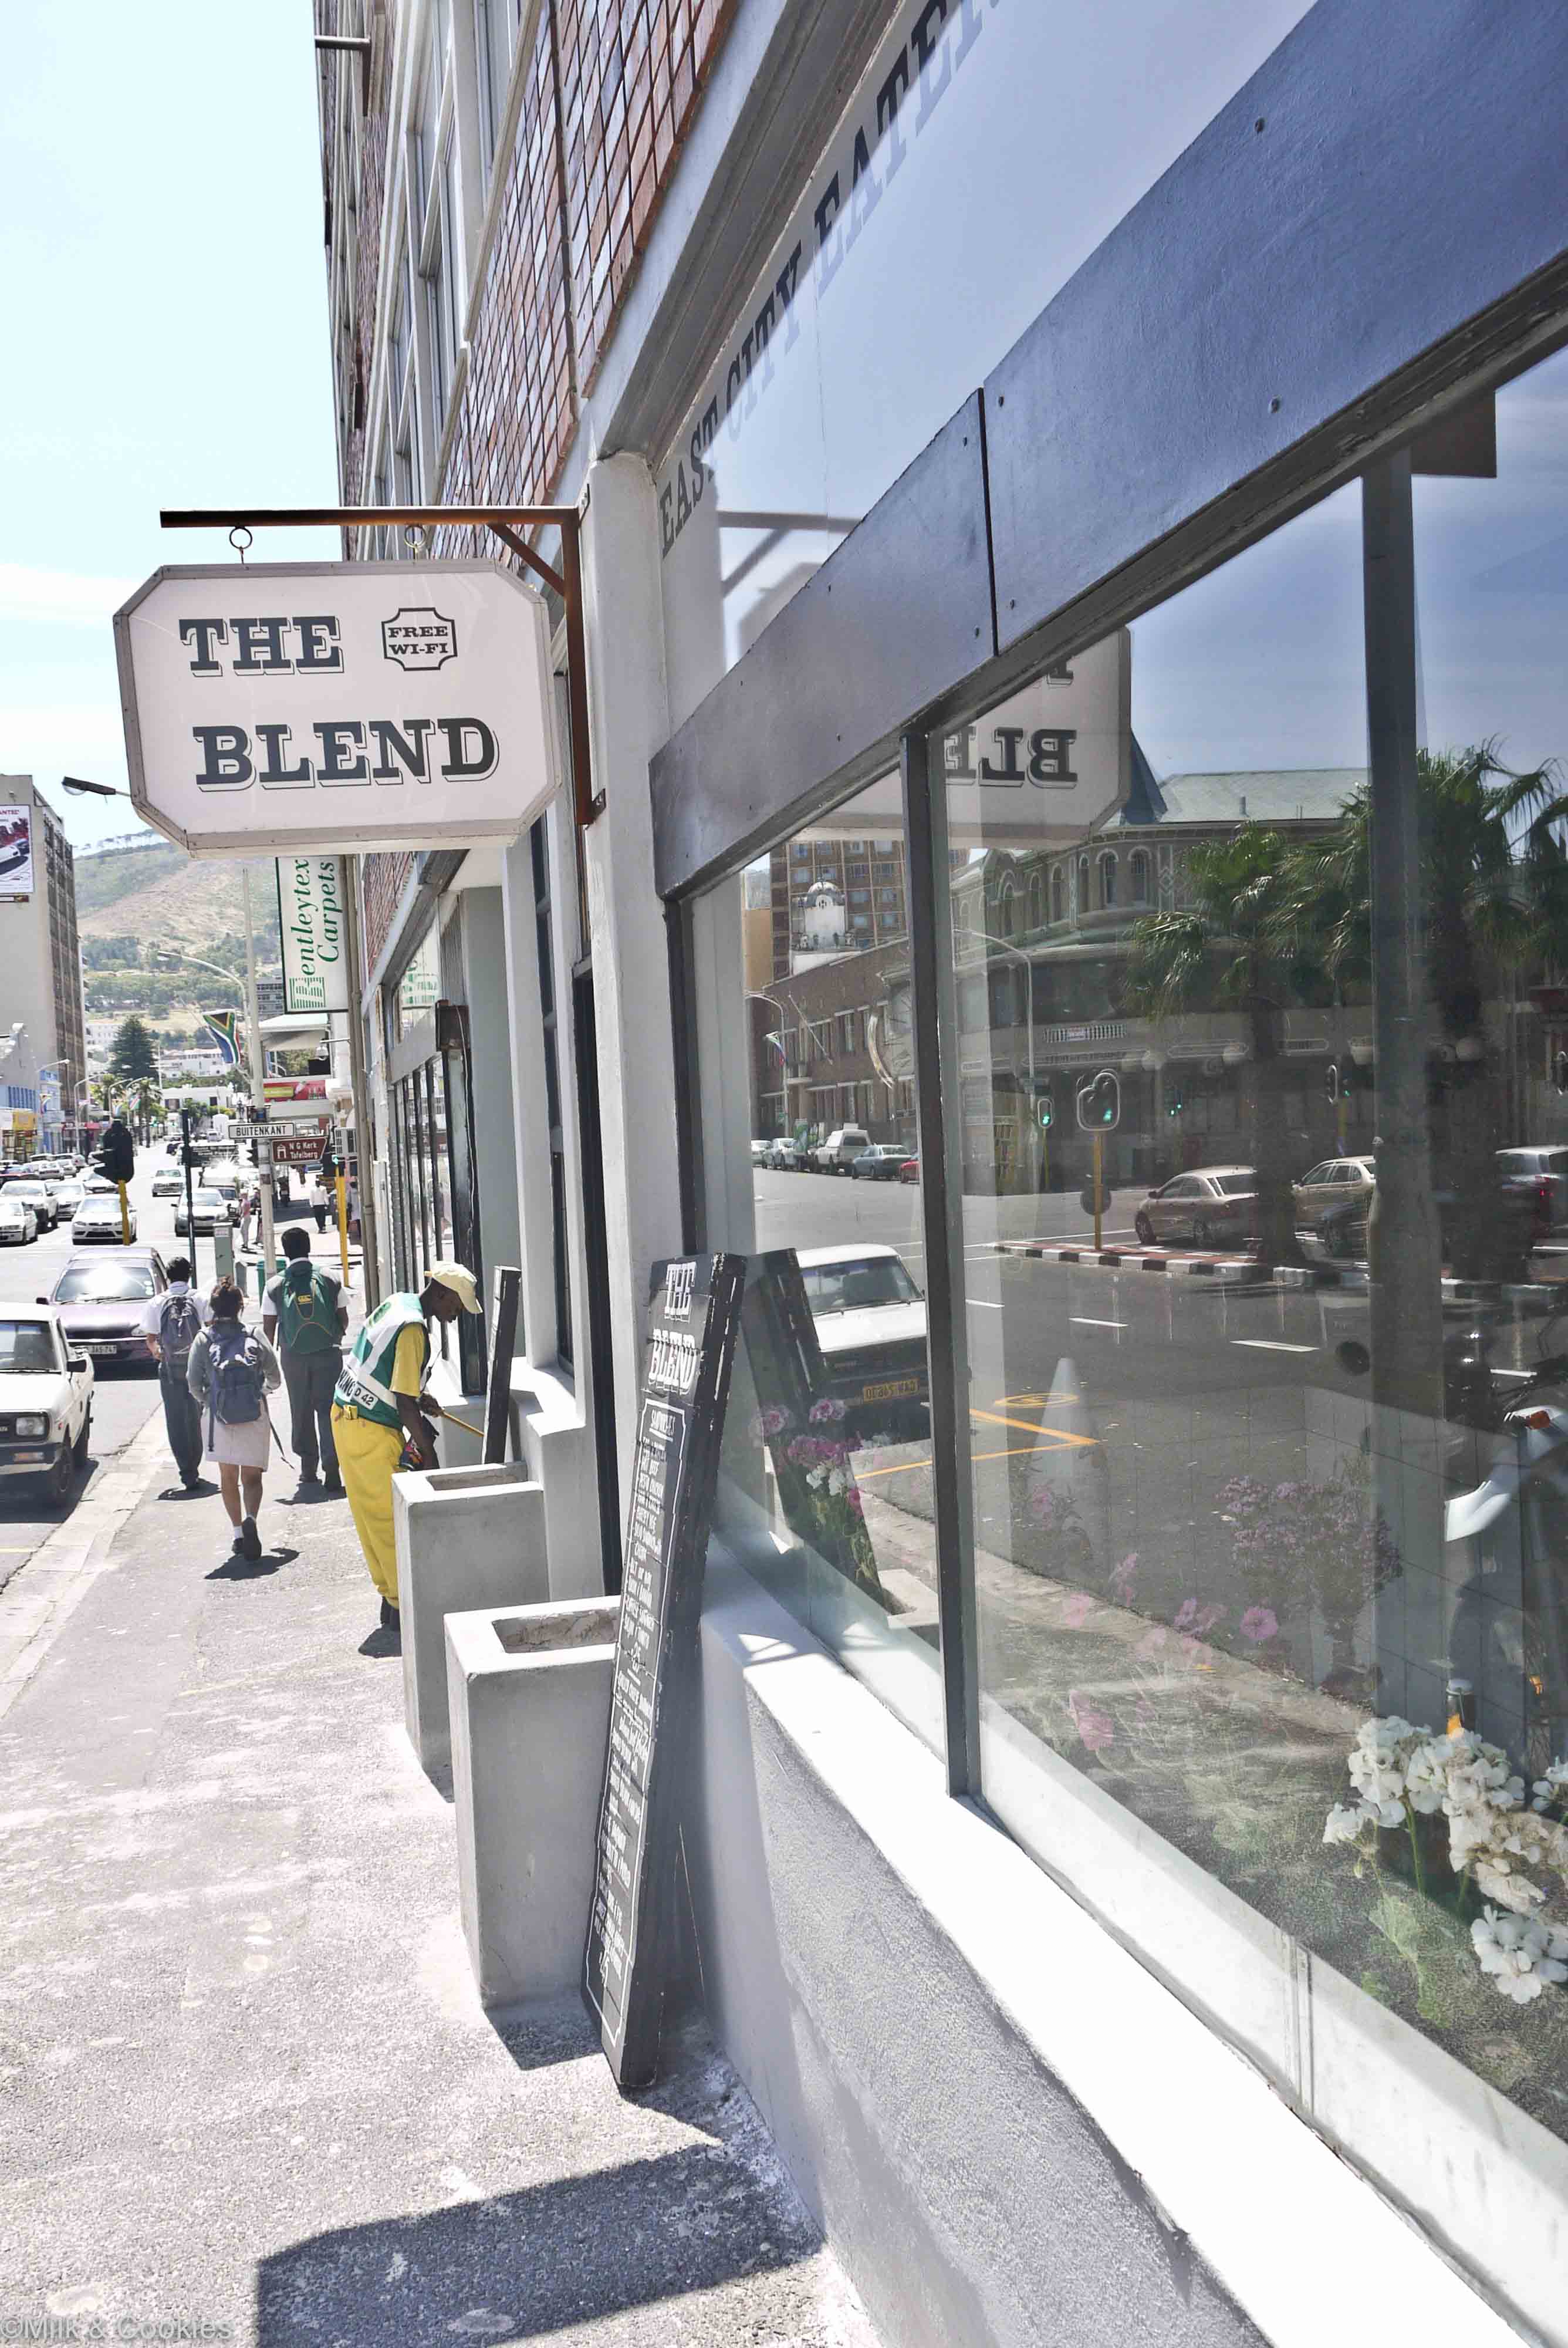 The Blend Cape Town | Milk and Cookies